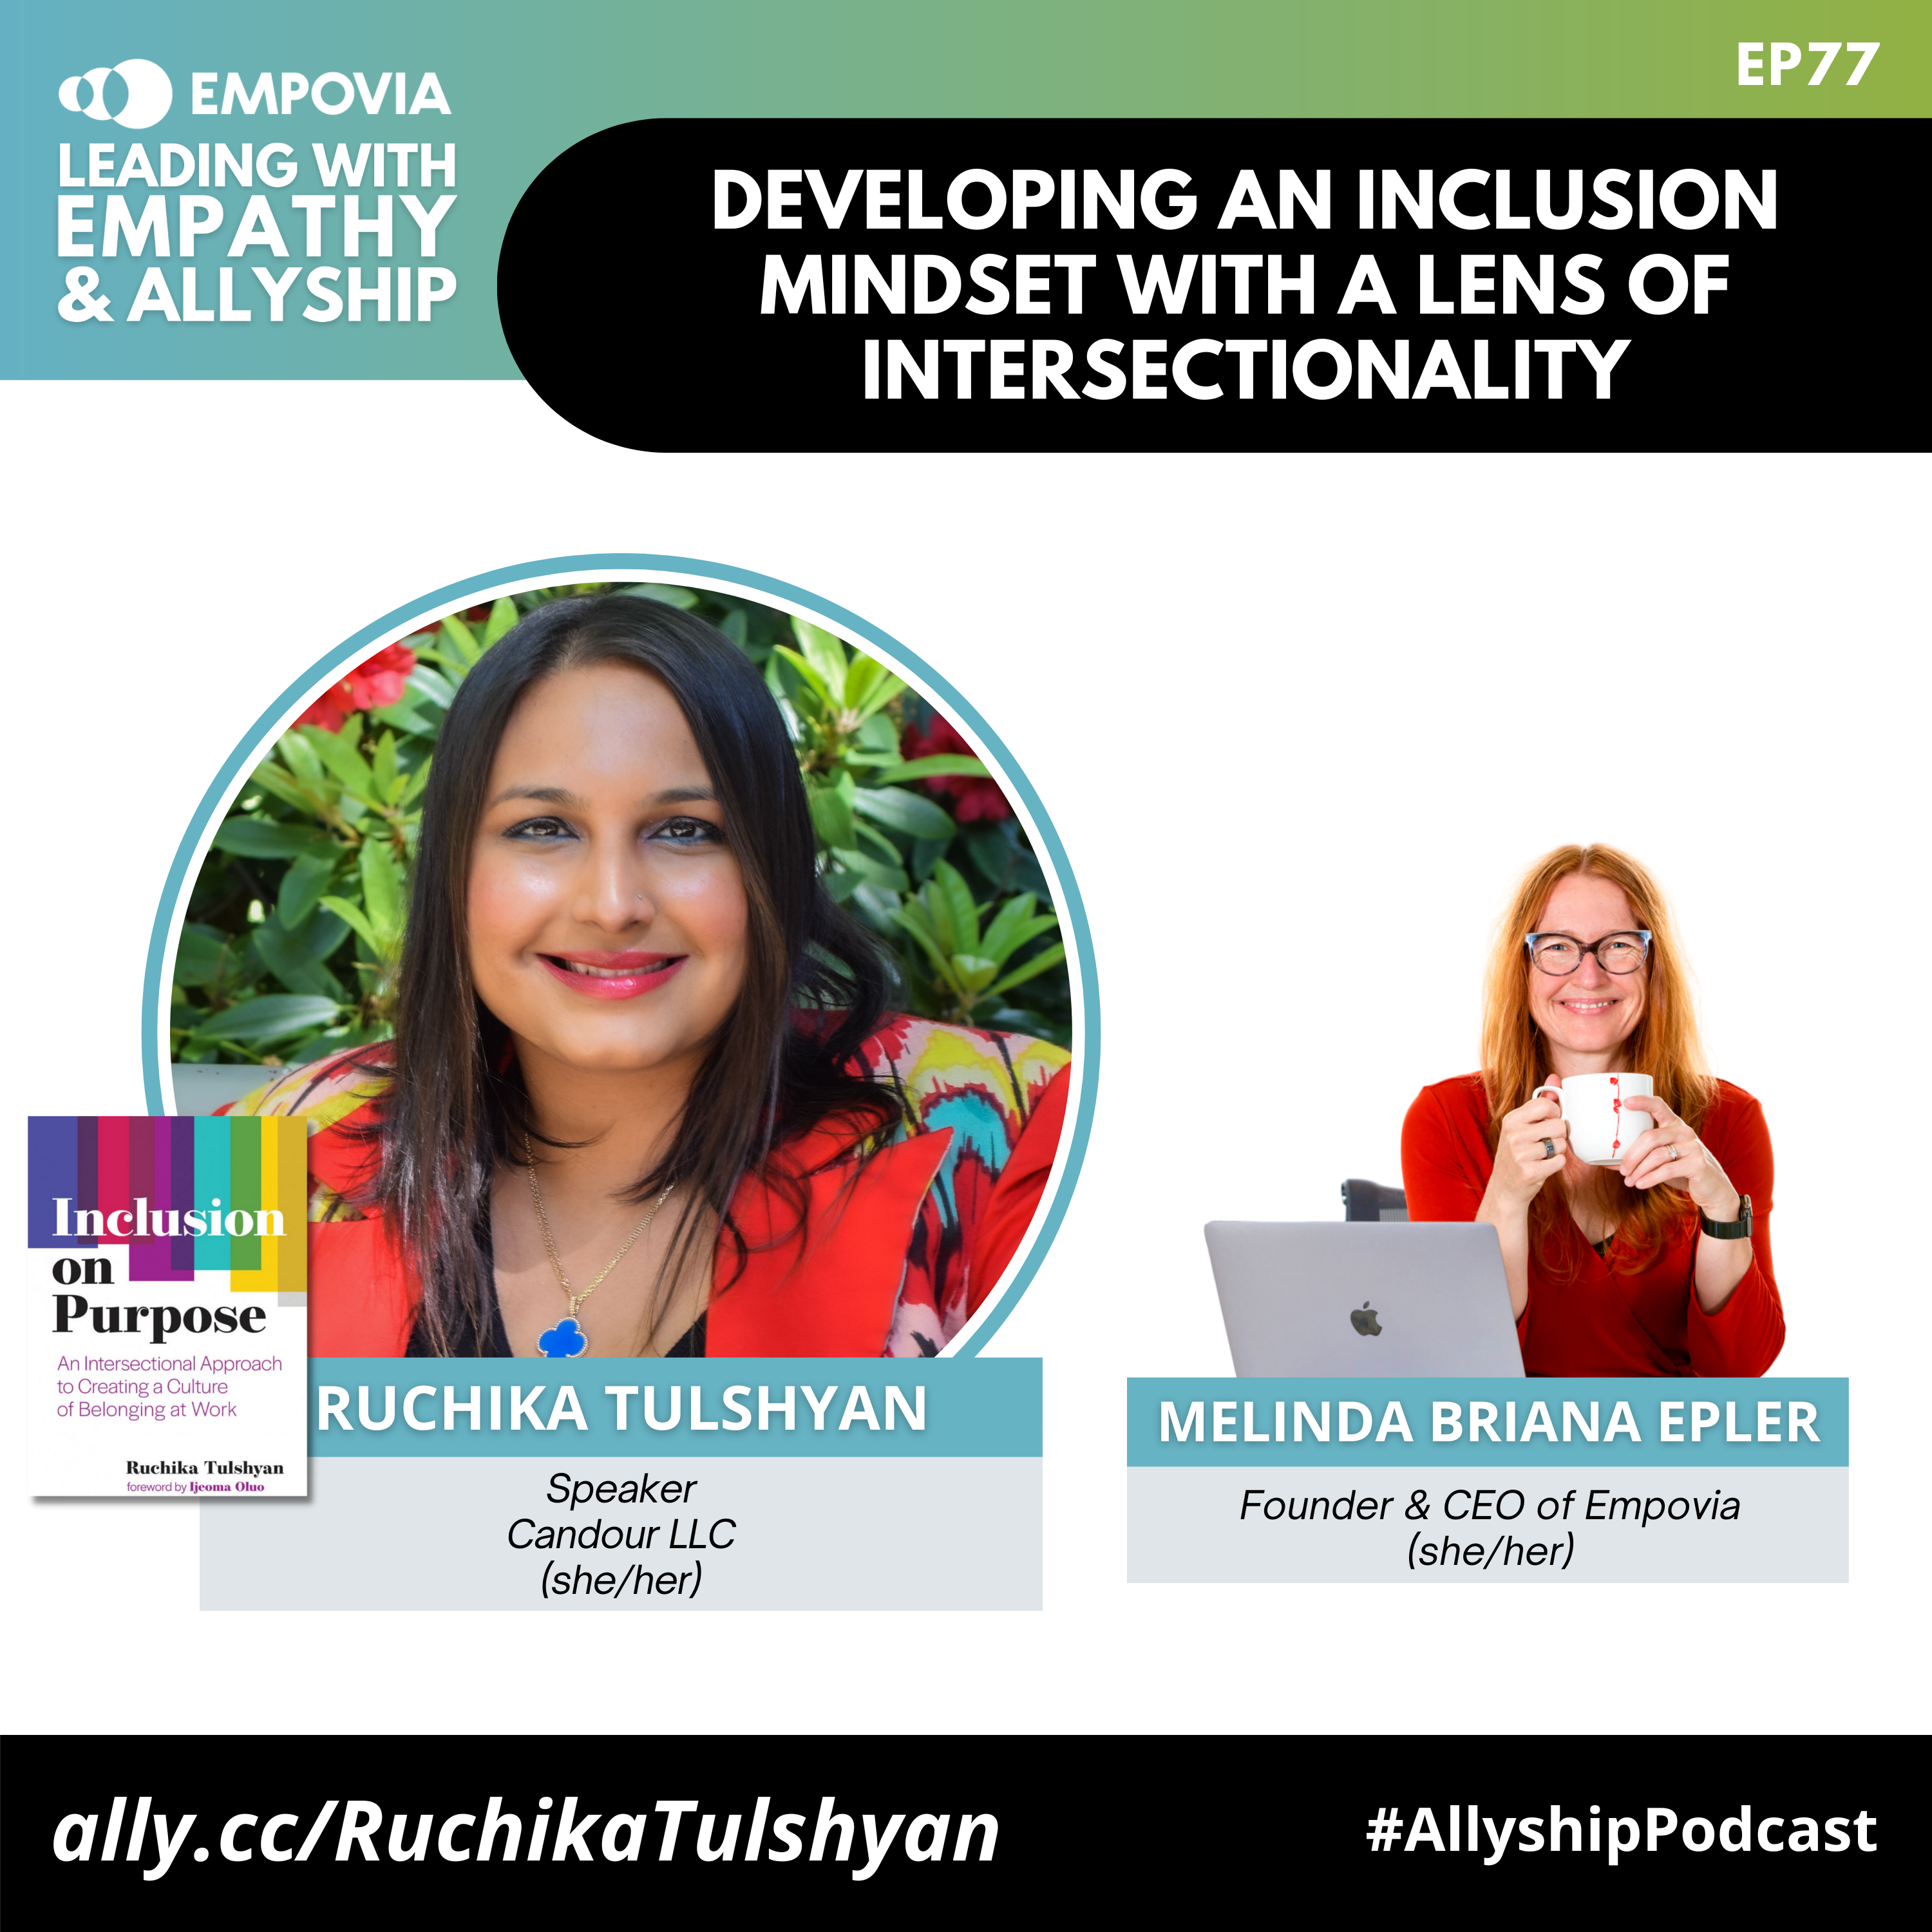 Leading With Empathy & Allyship promo with the Empovia logo and photos of Ruchika Tulshyan, a South Asian woman with medium-length dark brown hair, a blue necklace, and a colorful red jacket. She is smiling at the camera and is accompanied by the multicolored cover of her book “Inclusion on Purpose.” Next to Ruchika is host Melinda Briana Epler, a White woman with red hair, glasses, and an orange shirt holding a white mug behind a laptop.